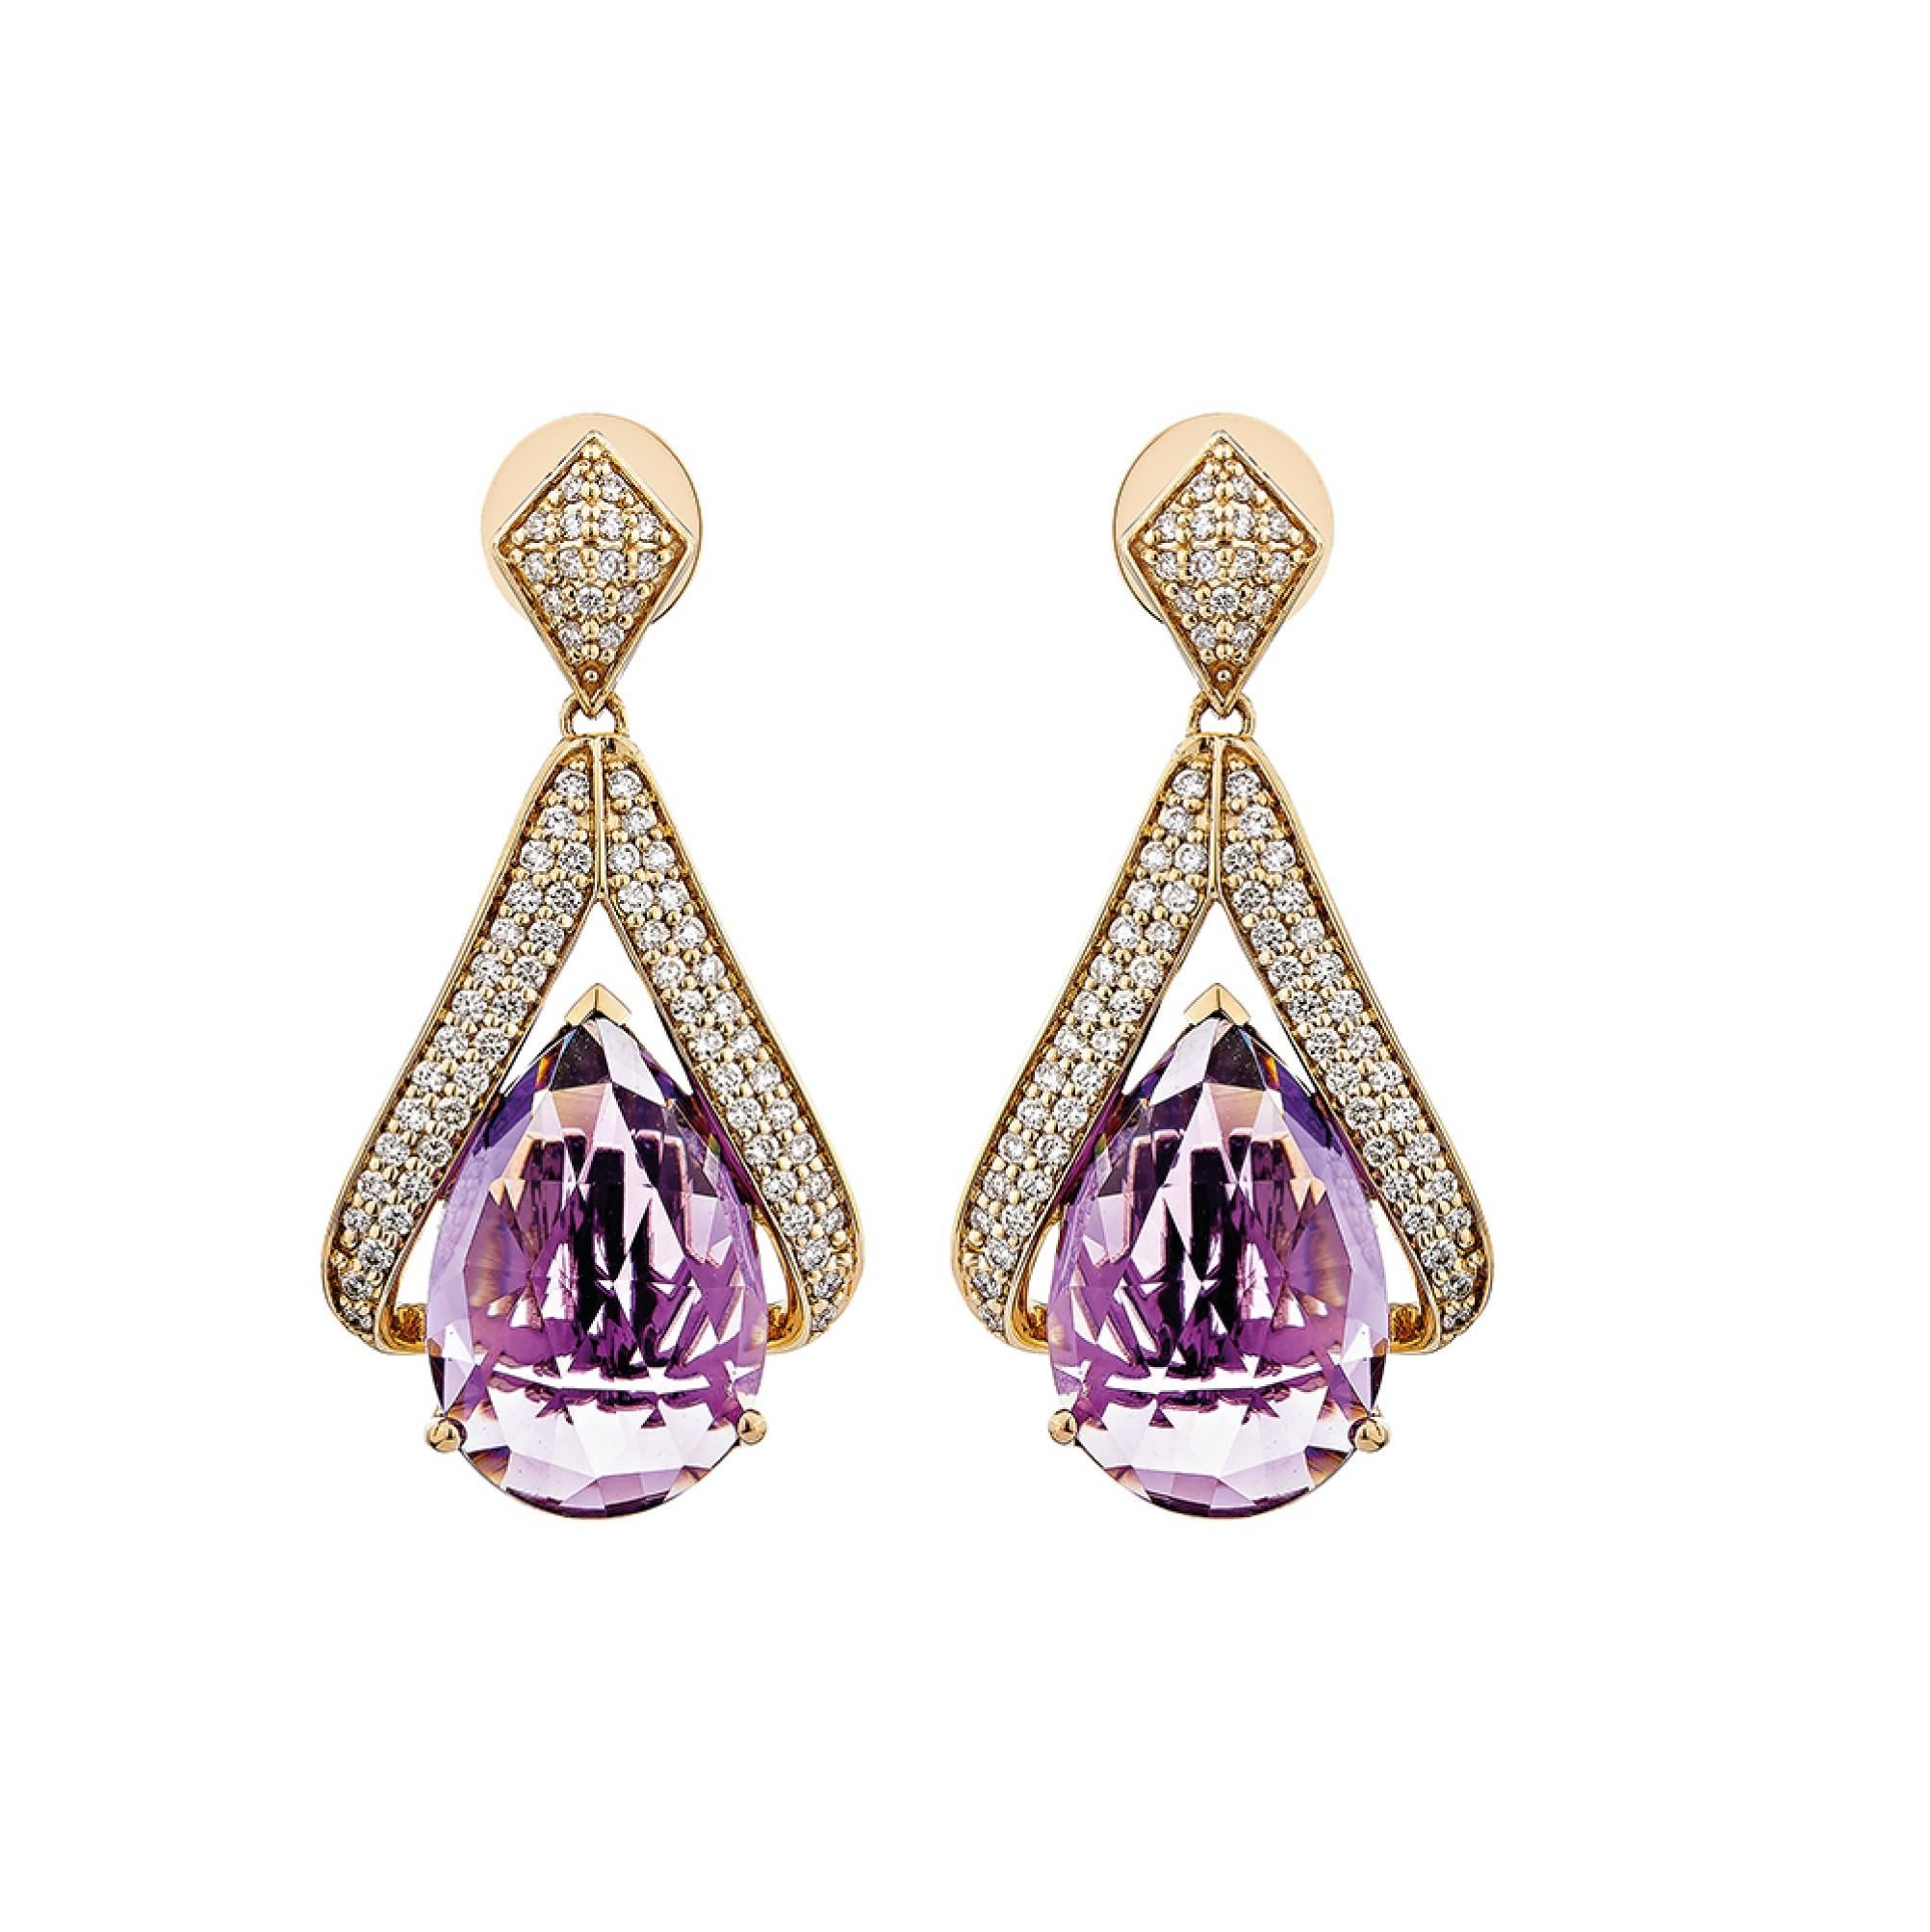 Contemporary 11.968 Carat Amethyst Drop Earring in 18Karat Rose Gold with White Diamond. For Sale